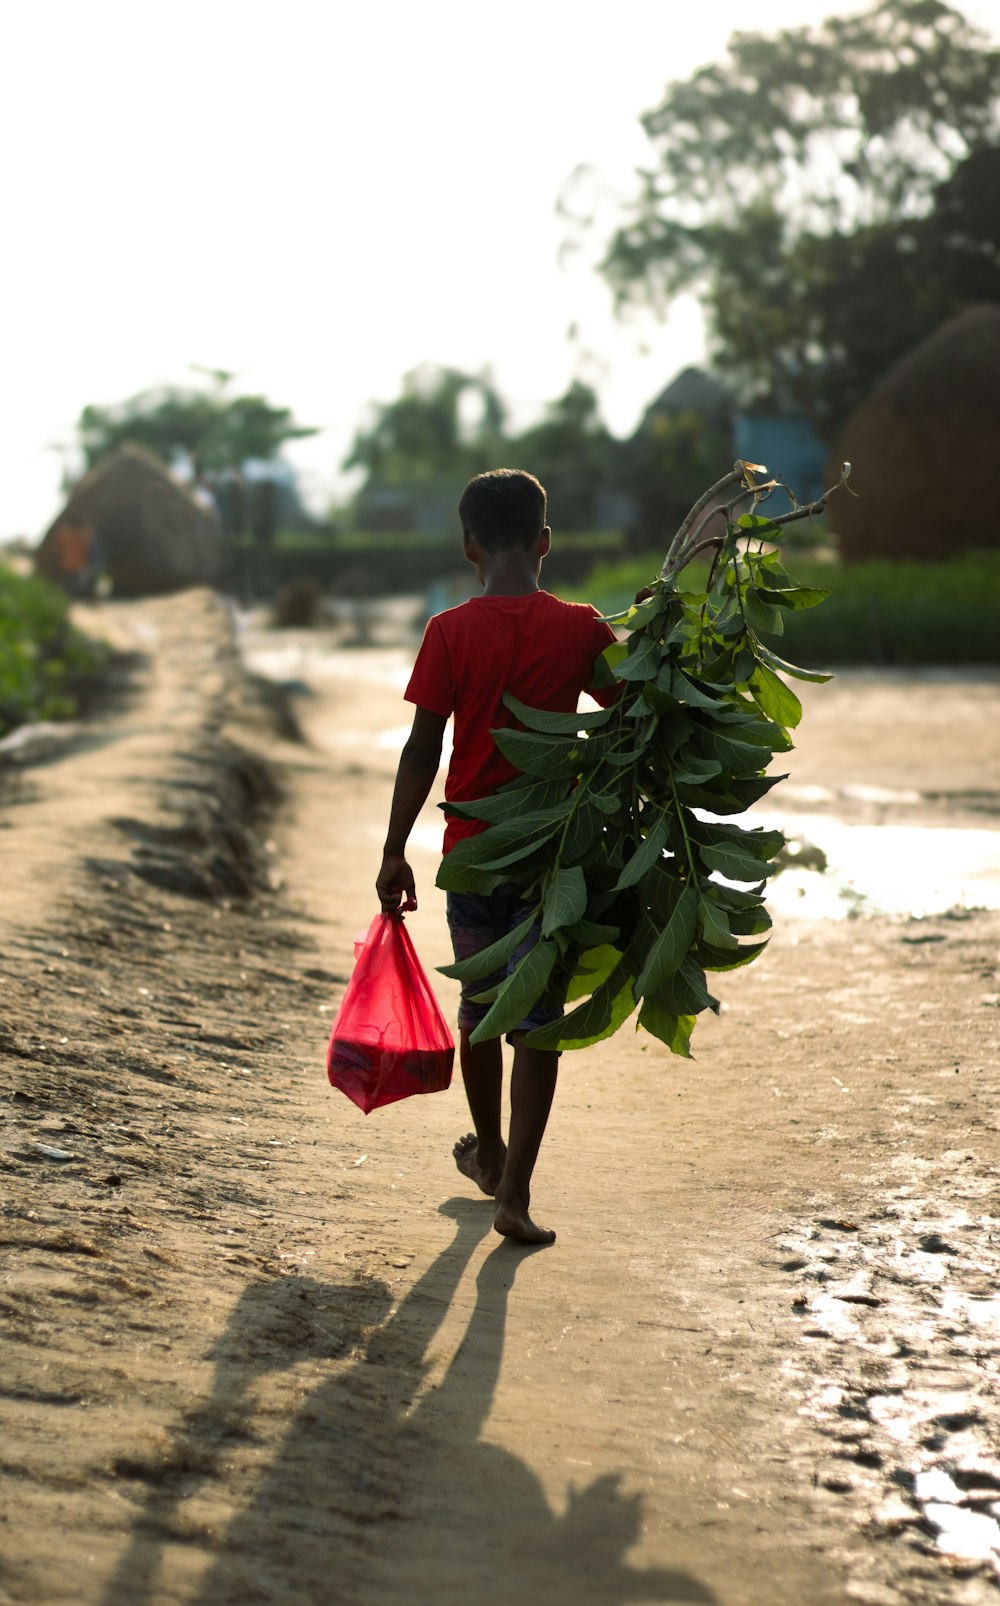 a boy walking down a dirt road carrying a red bag